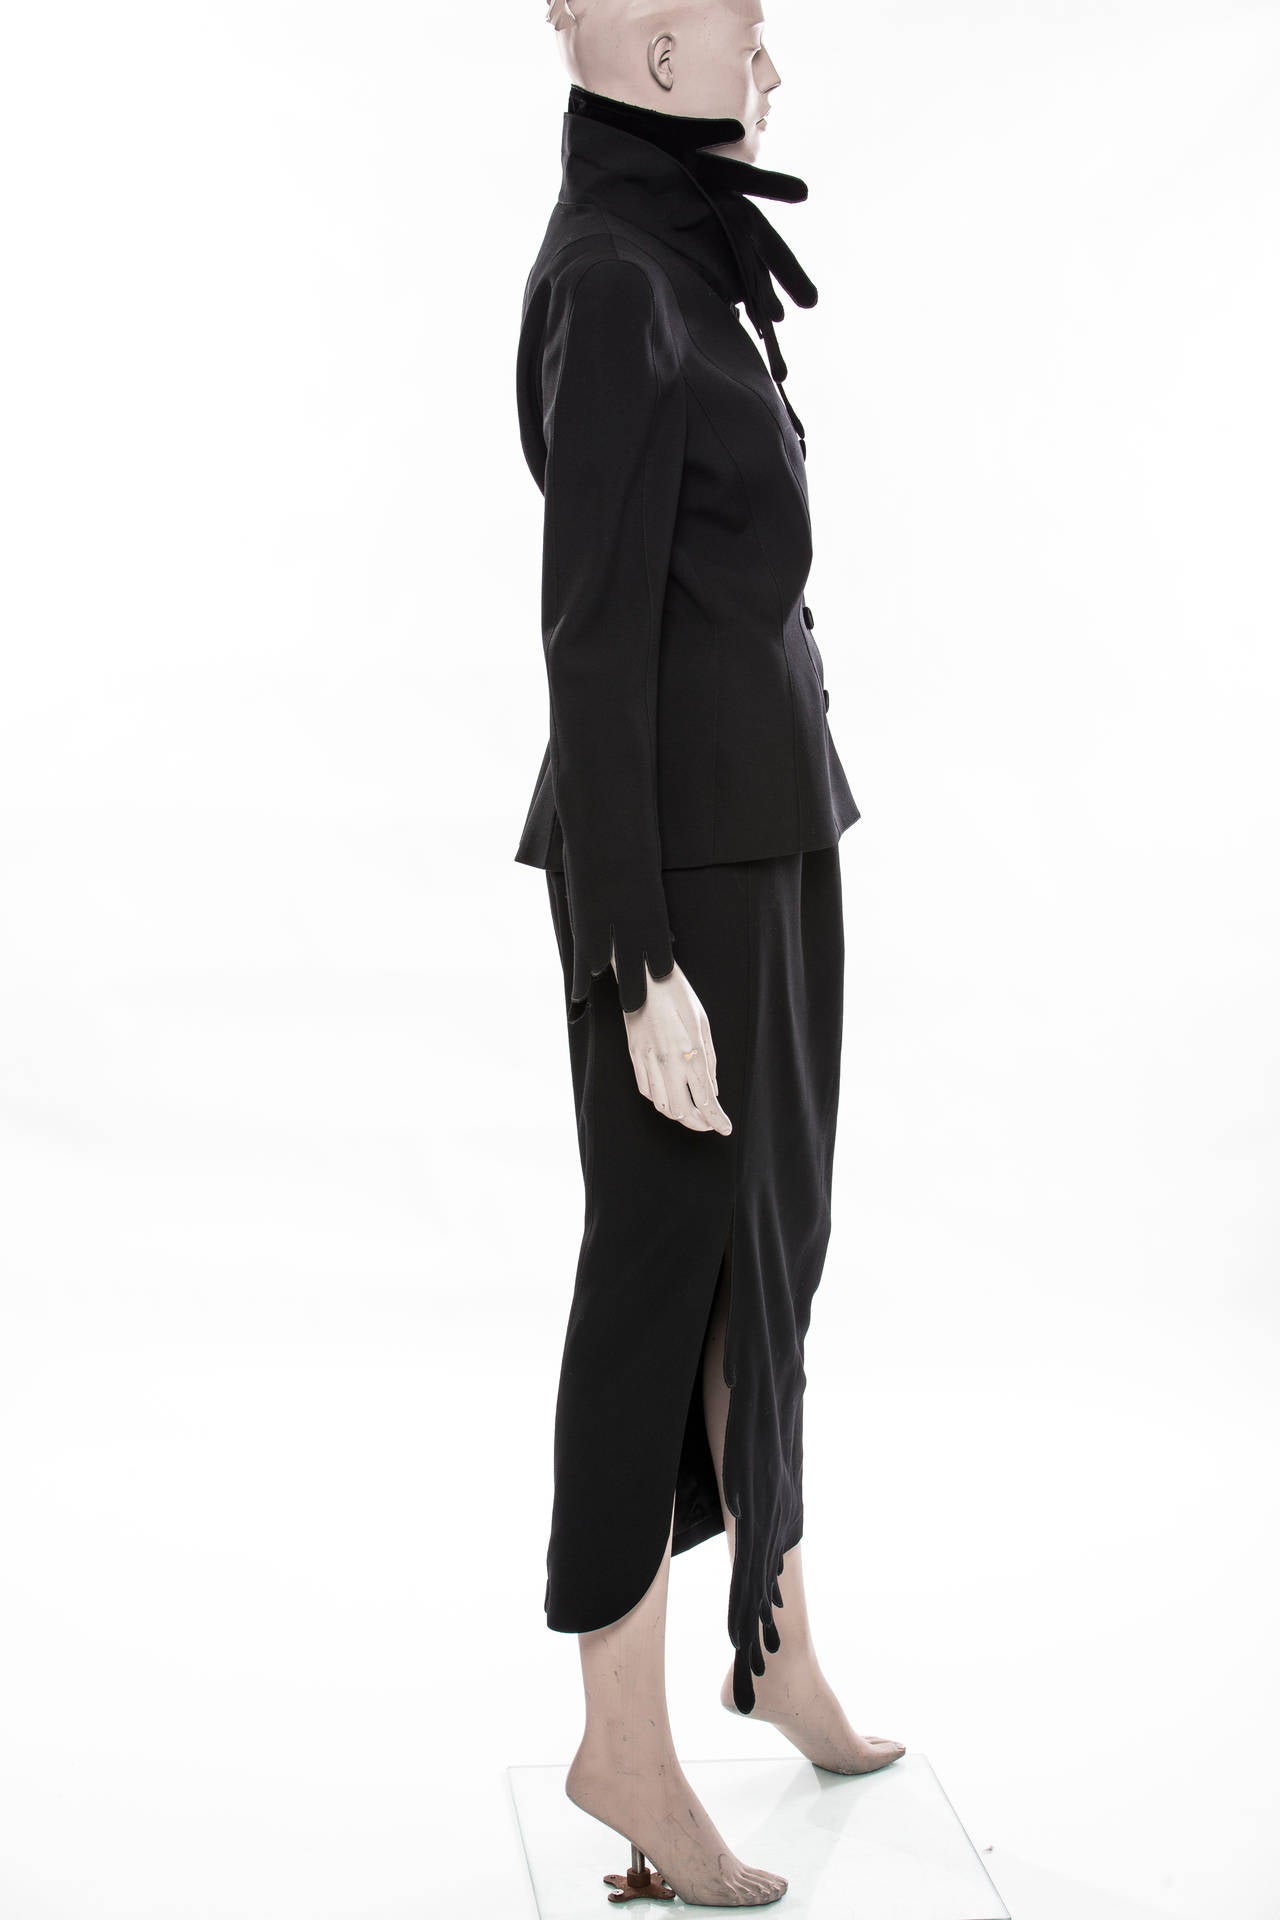 Thierry Mugler, circa 1980's black skirt suit, snap front, velvet buttons, skirt has side zip and fully lined.